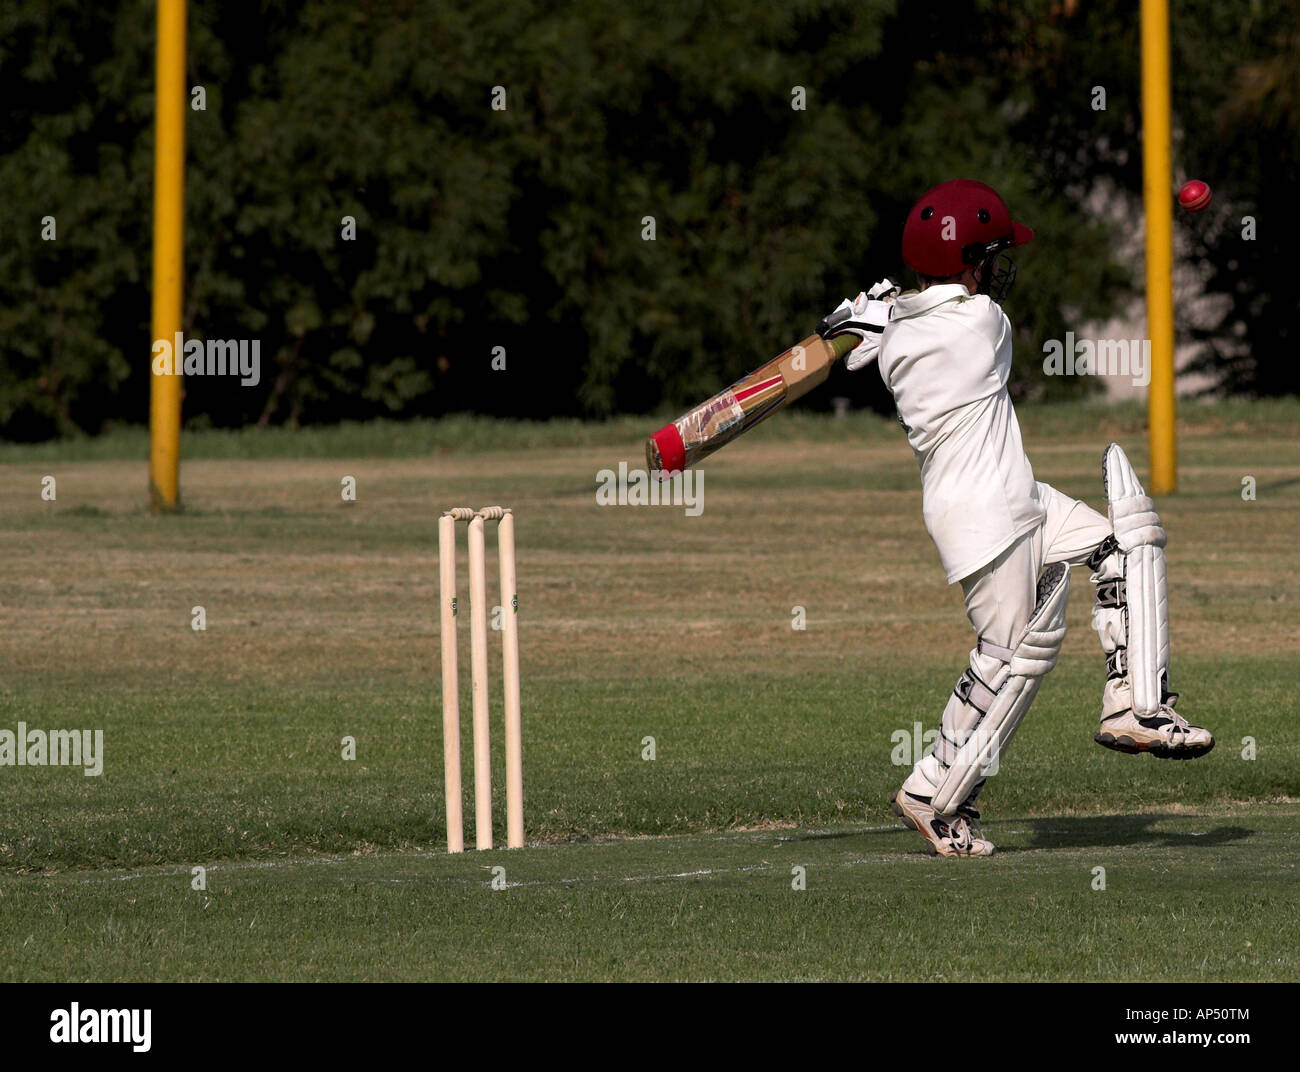 Young boy pulling or hooking a cricket ball during a match Ball in the air caught in motion Stock Photo